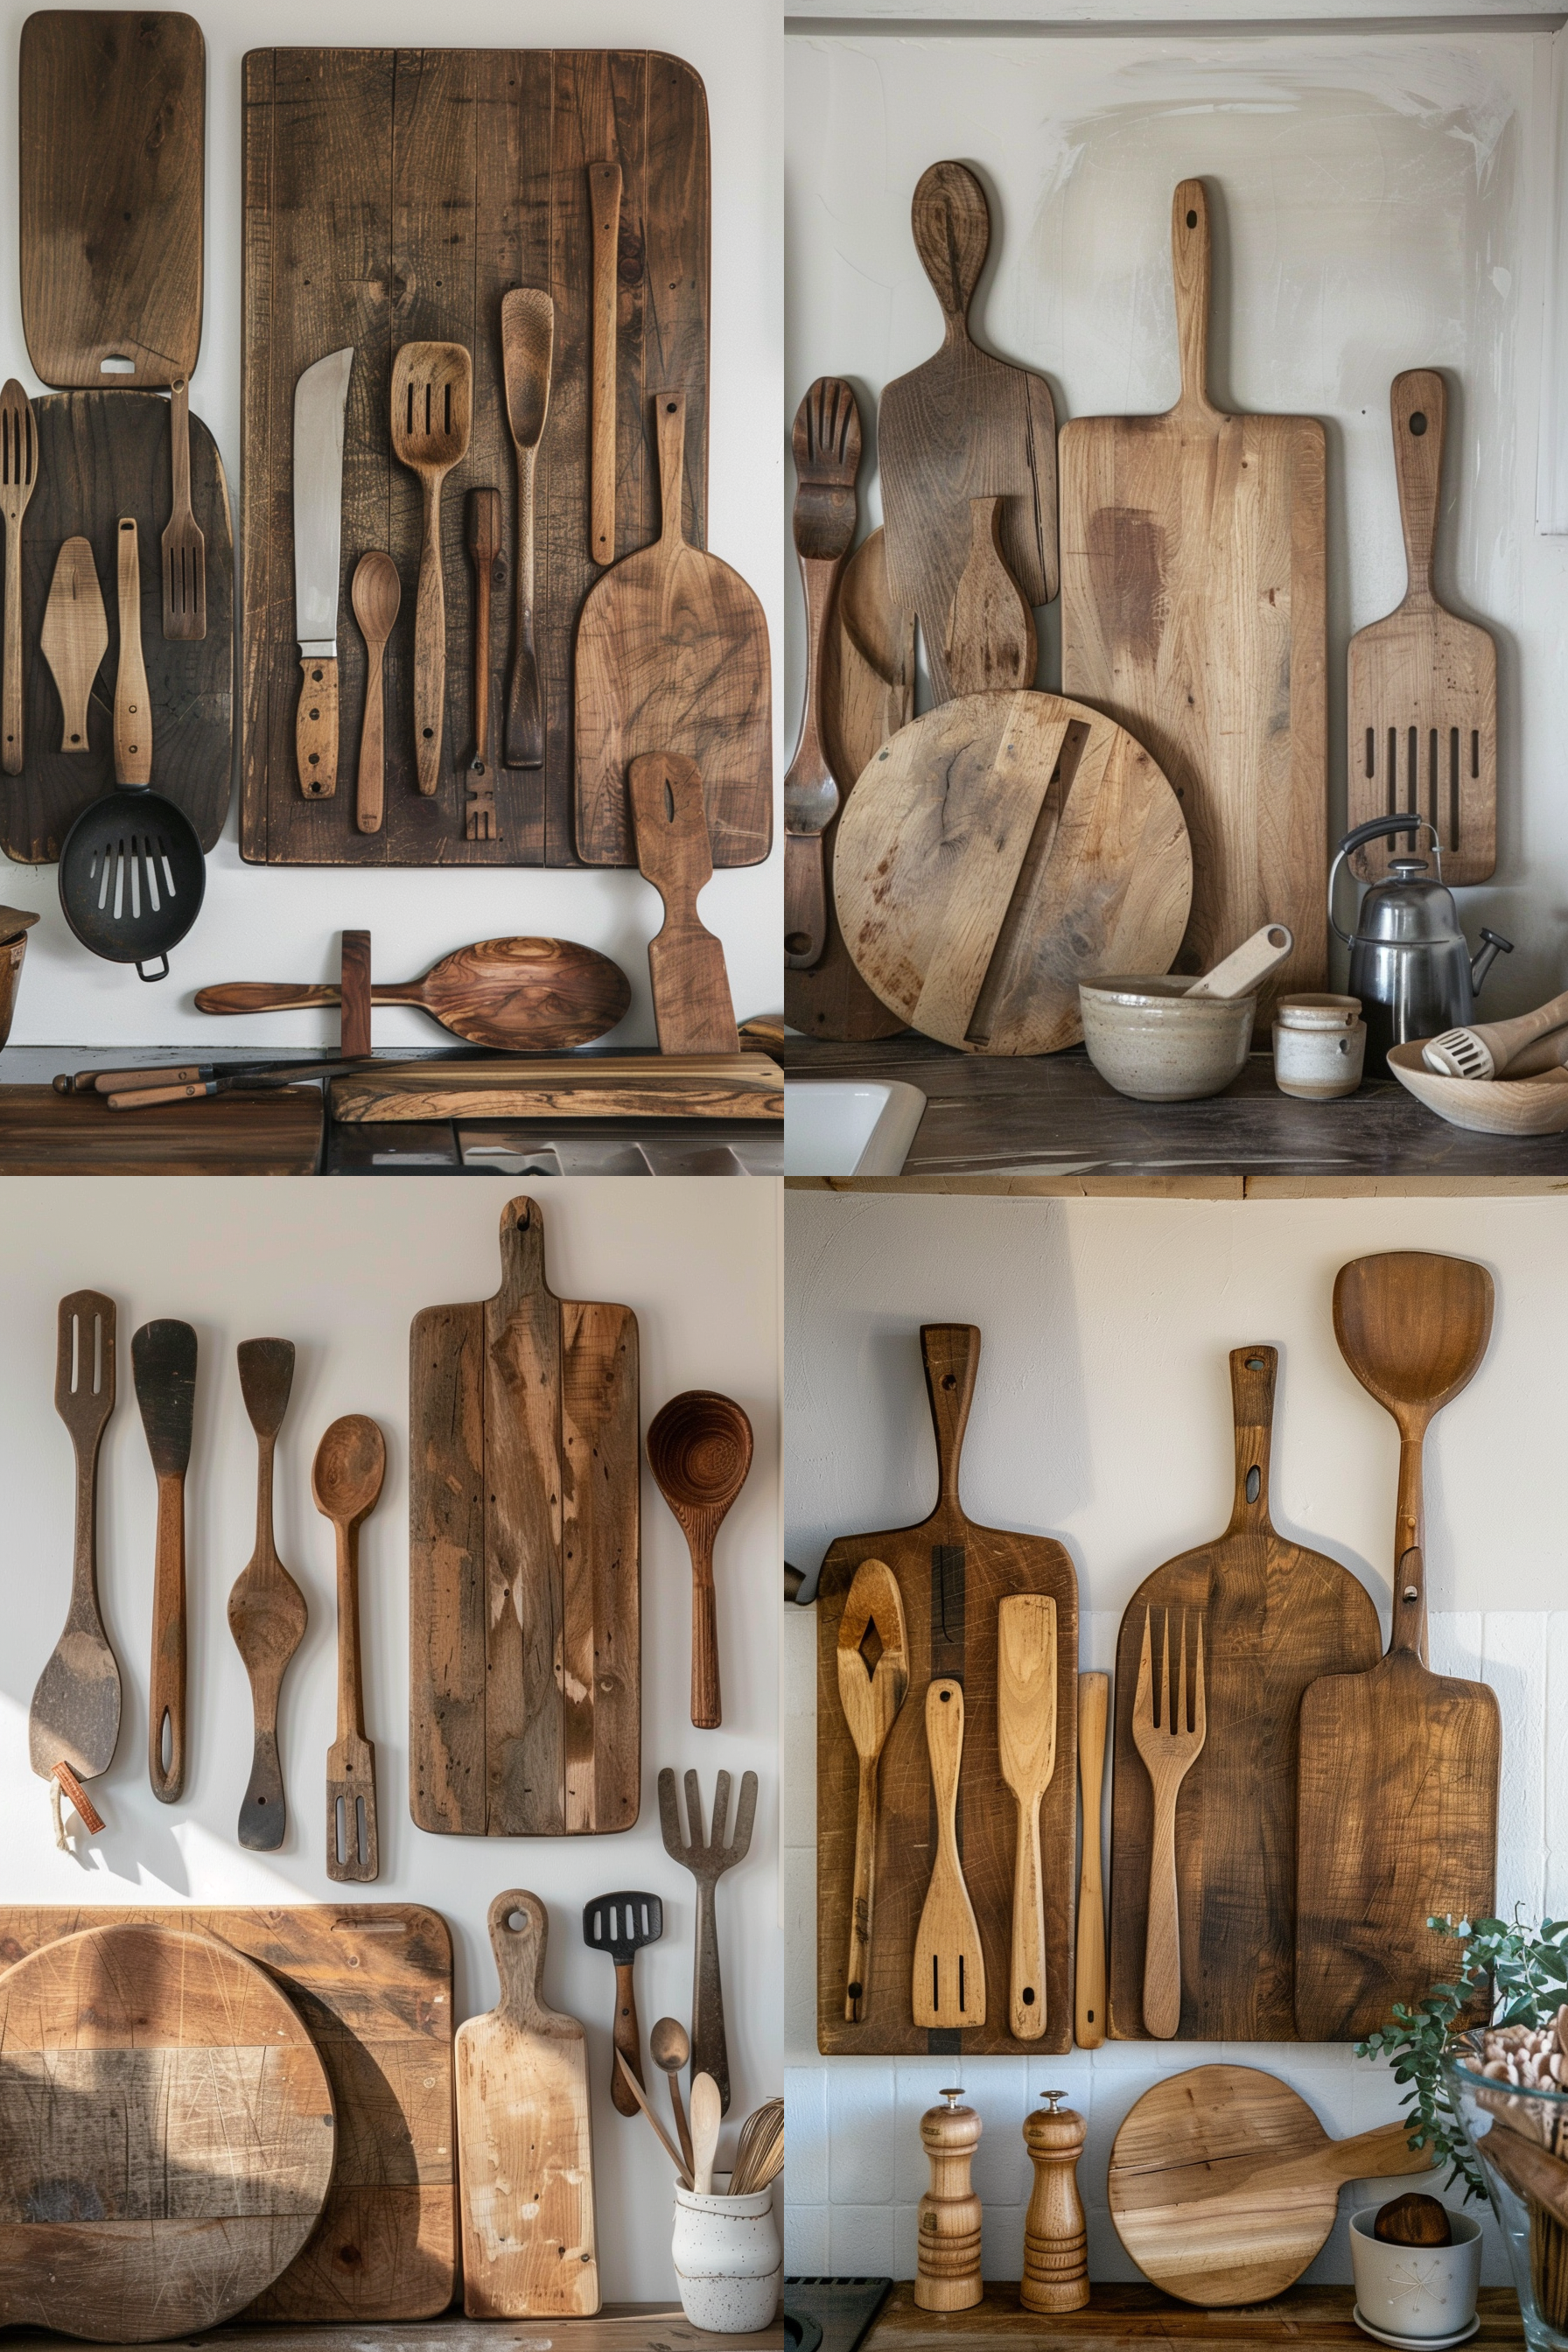 ALT: A variety of wooden kitchen utensils and cutting boards arranged decoratively on shelves against a wall.